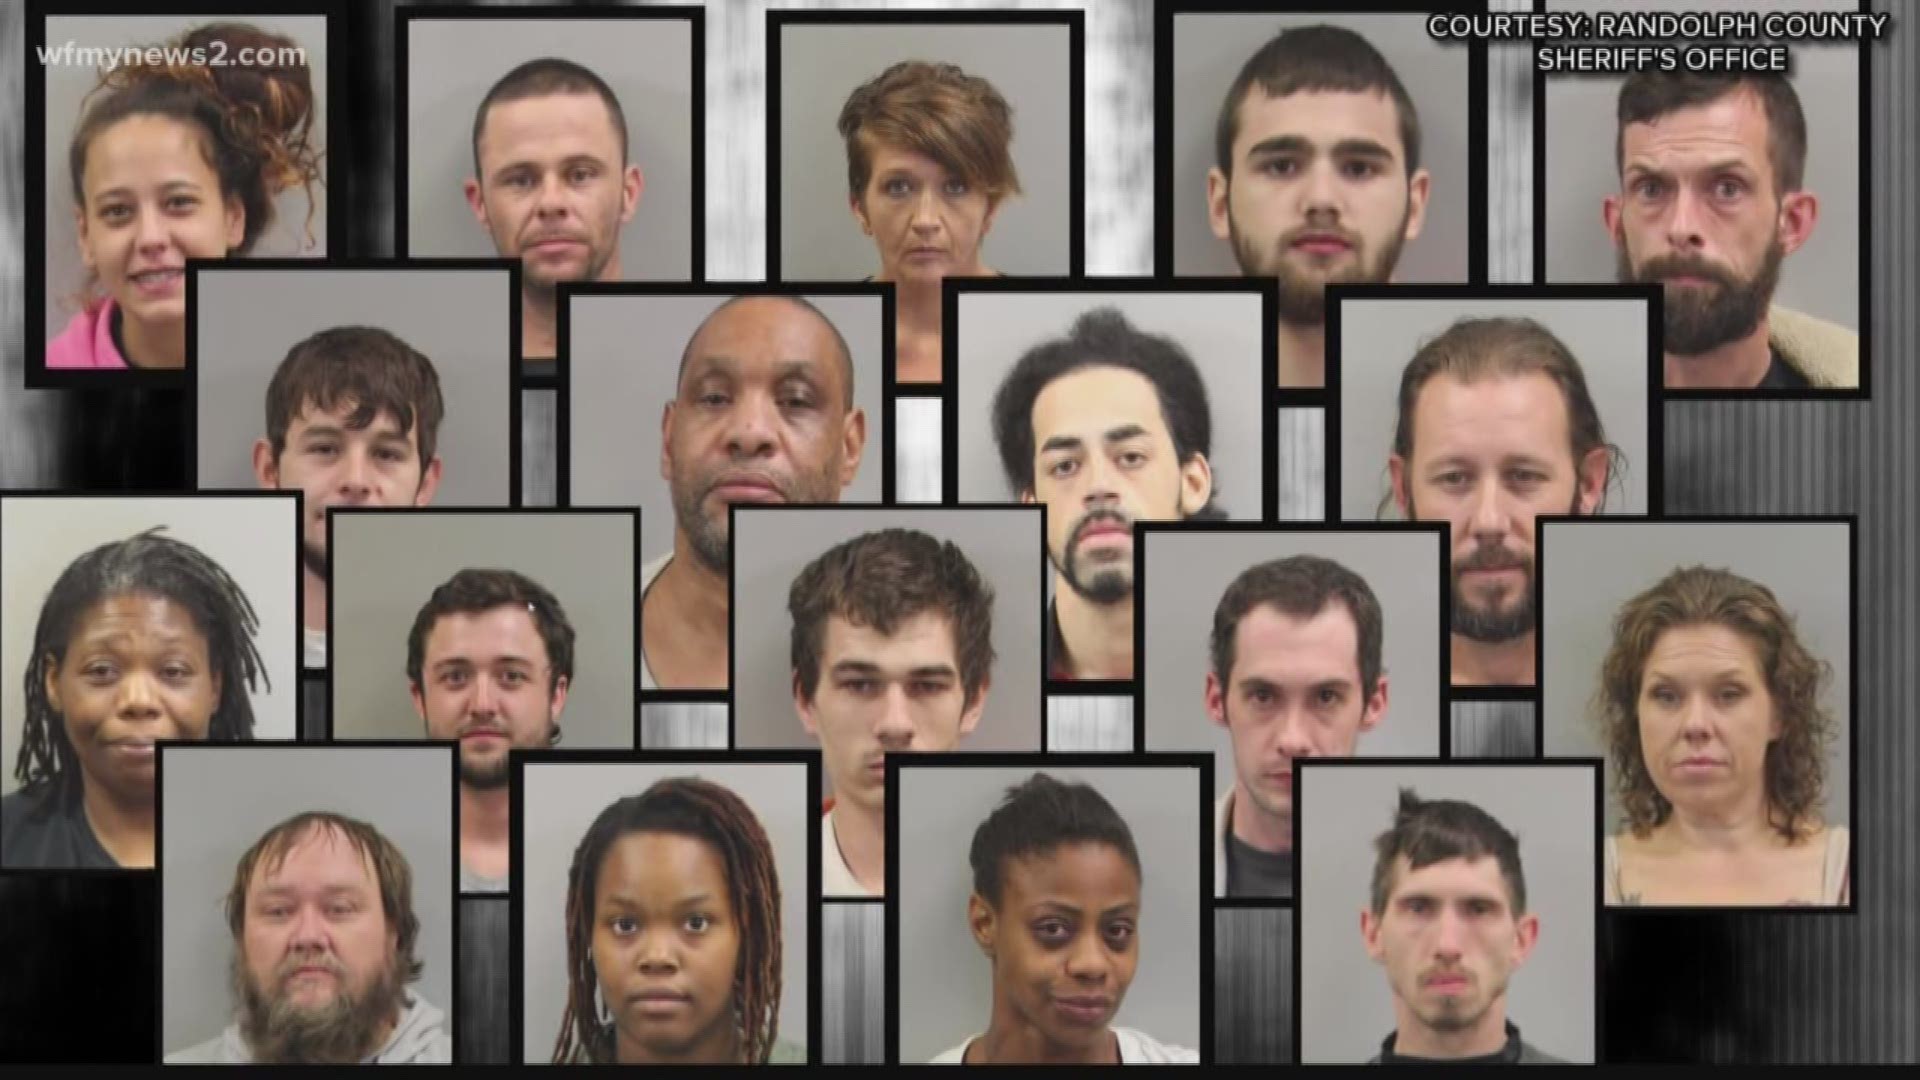 Deputies make 66 drug arrests in just 2 months. We find out if the number is true and what the new sheriff's strategy is.